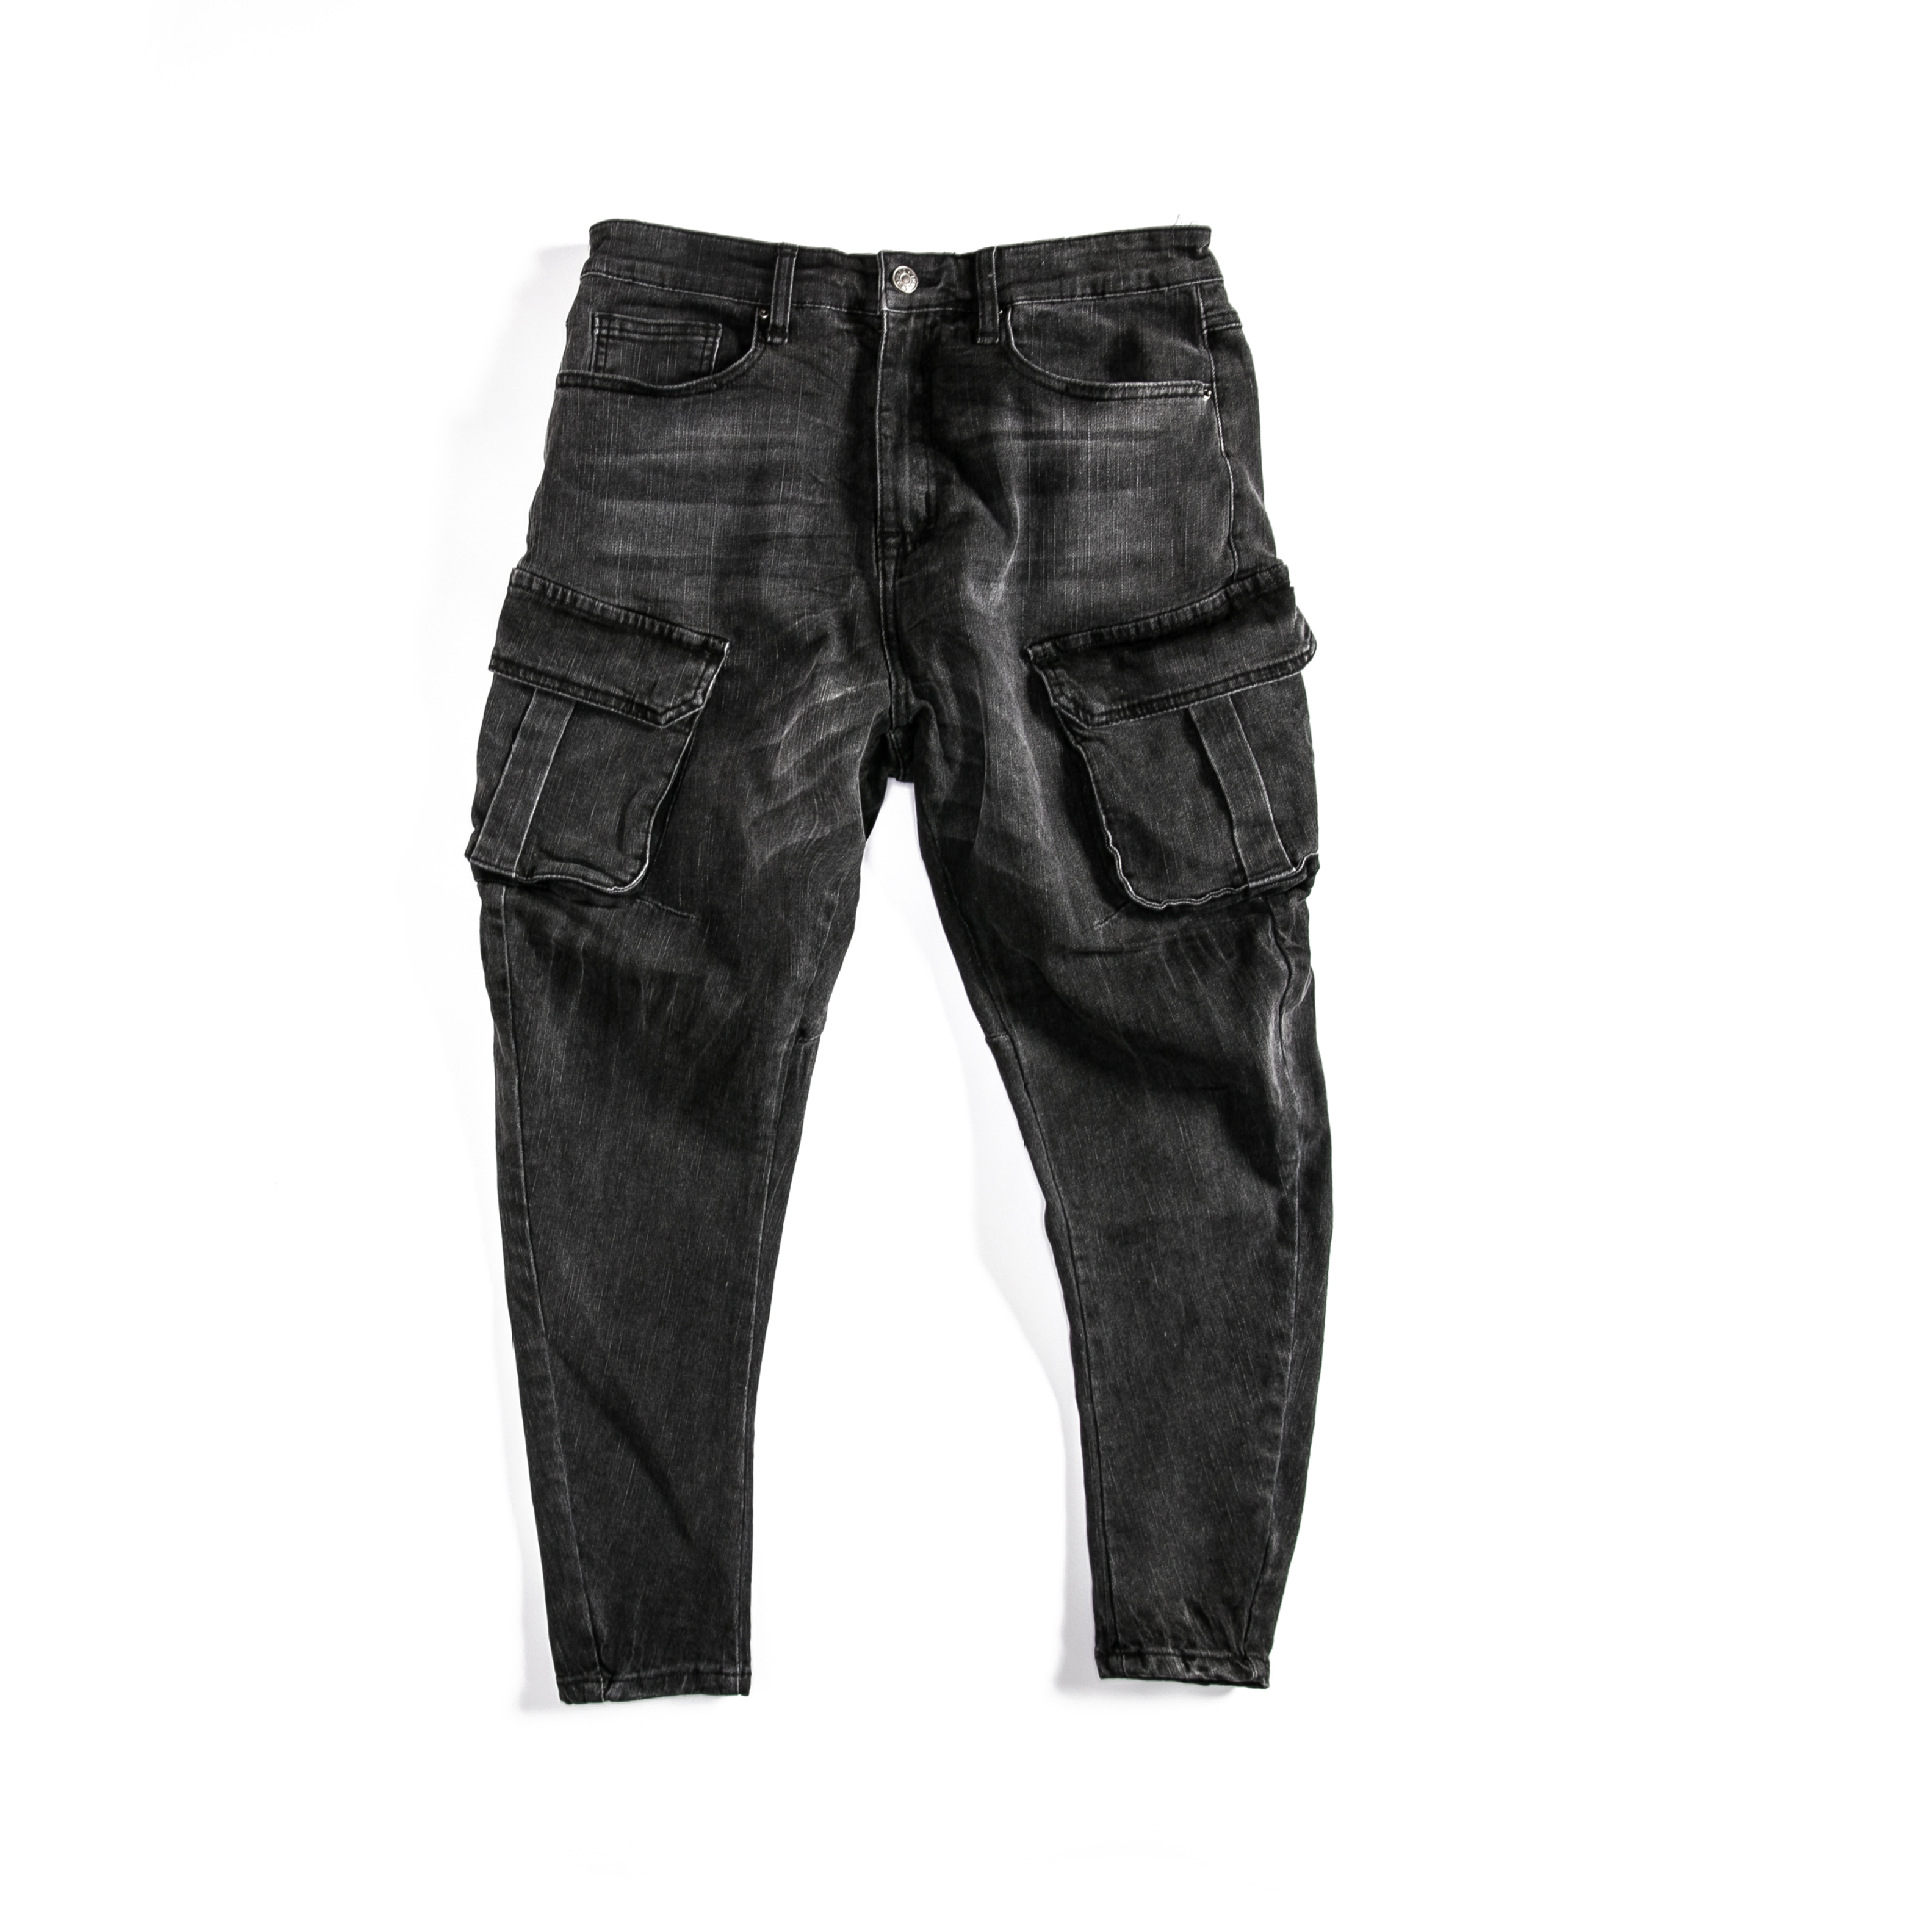 Knee Hole Zippers And Feet Hole Denim Trousers - CJdropshipping